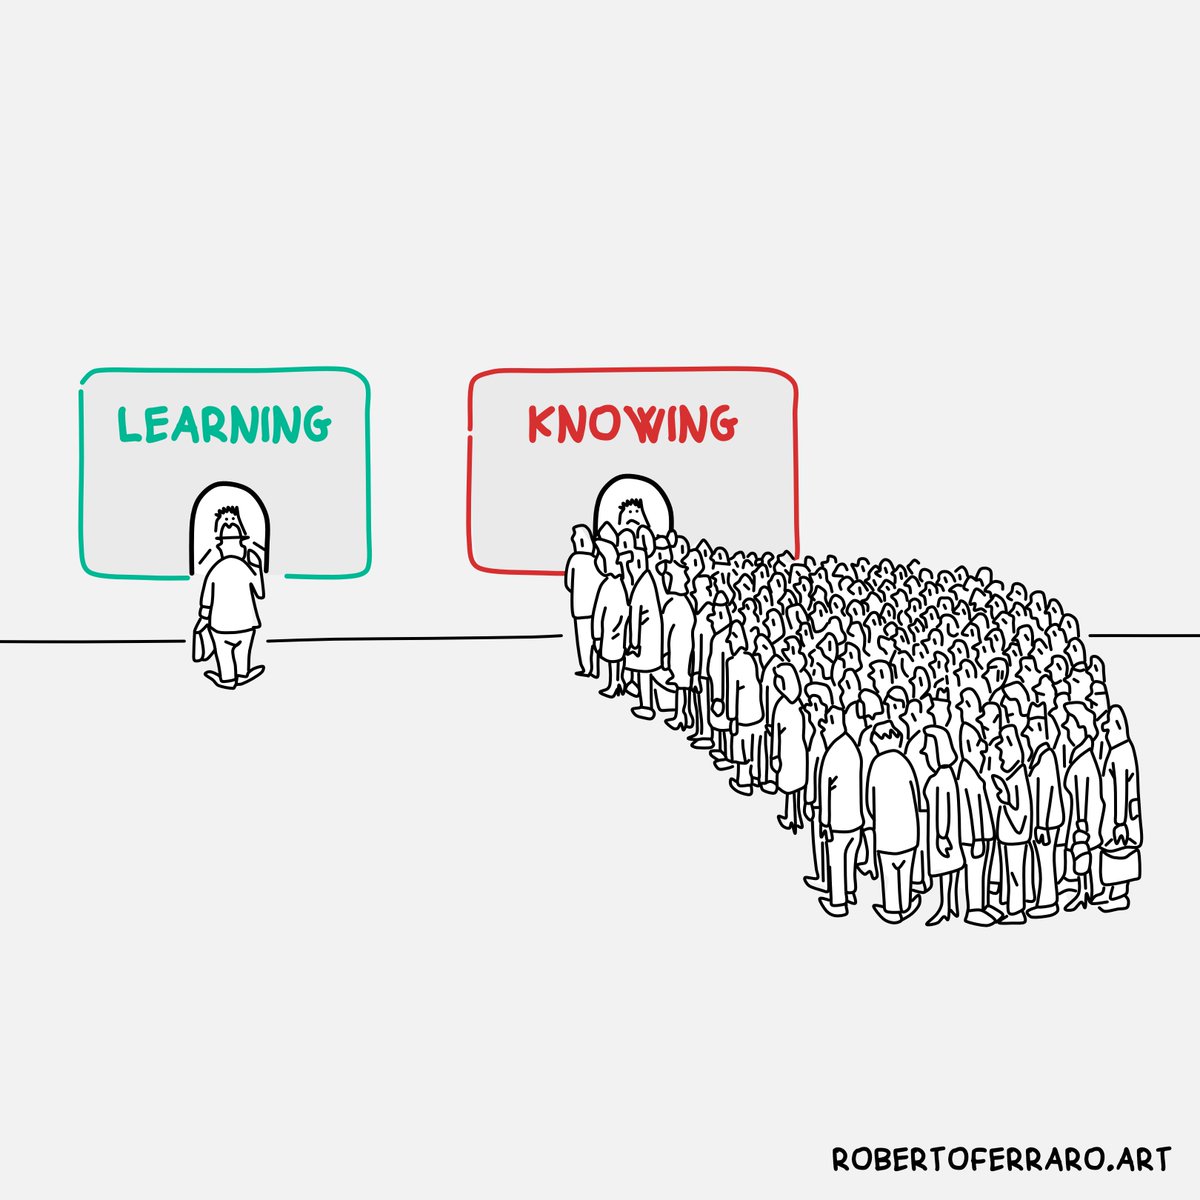 Being curious, asking questions, and prioritizing learning over knowing makes all the difference.